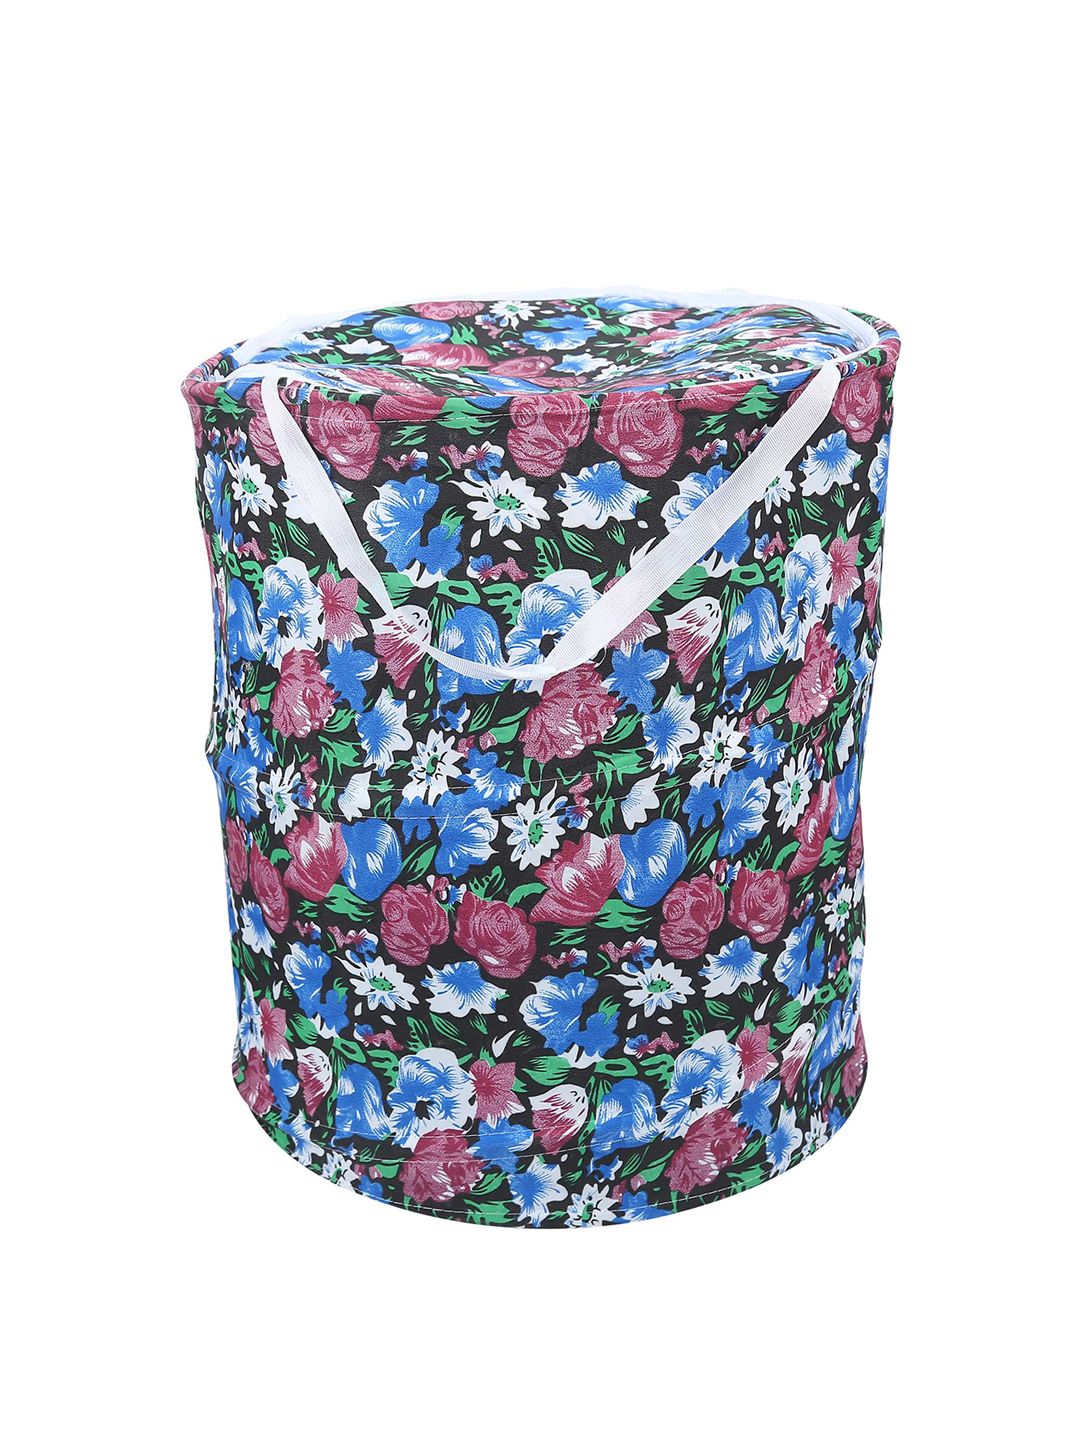 Clasiko Black & Blue Floral Printed Laundry Bag Price in India